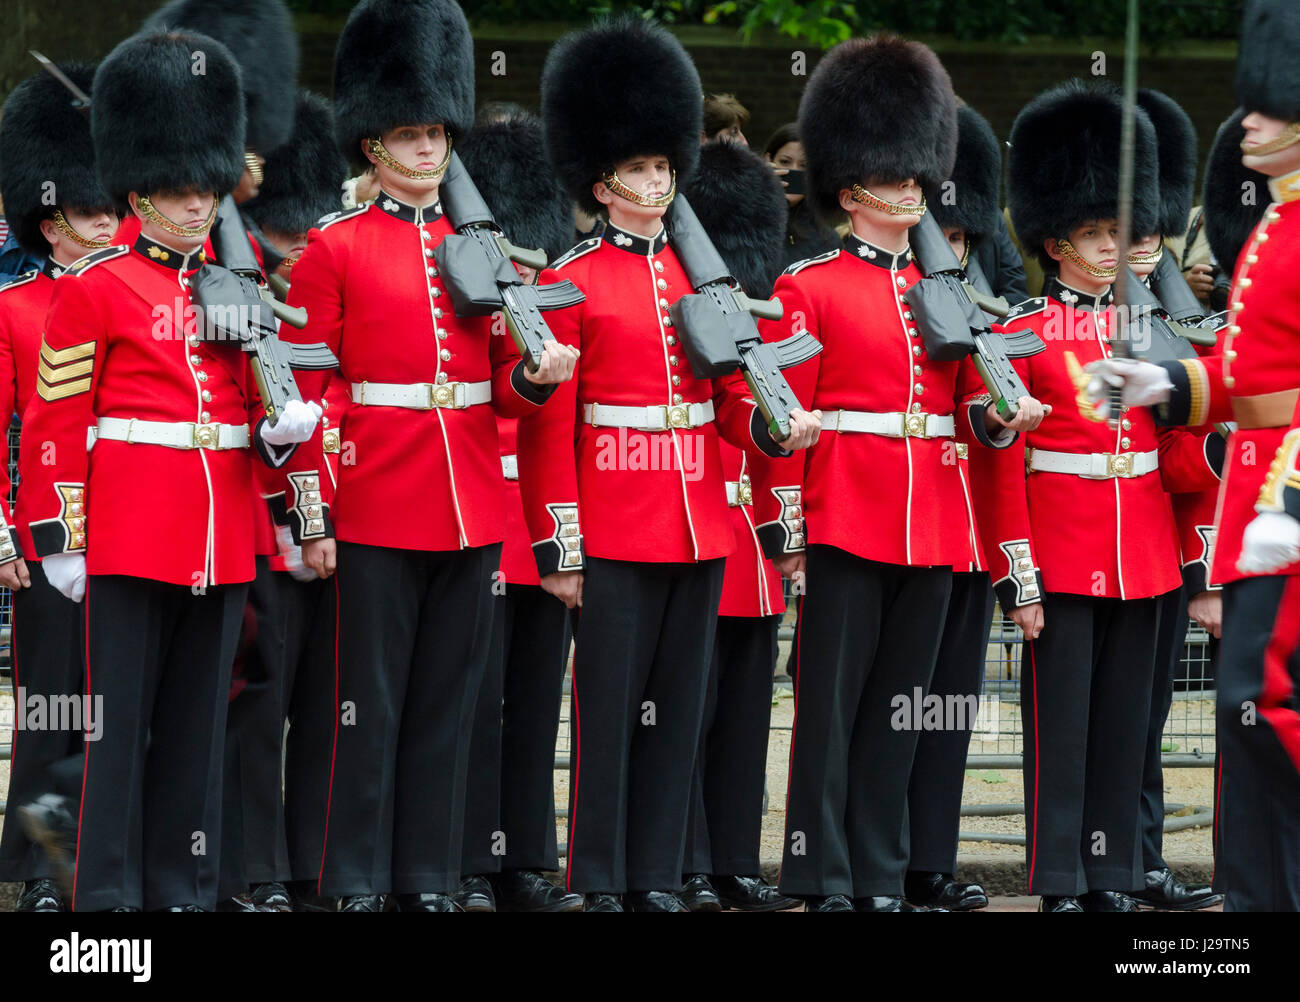 LONDON - JUNE 13, 2015: Members of the Queen's Royal Guard stand at attention in a Trooping of the Colour procession for an event on The Mall. Stock Photo